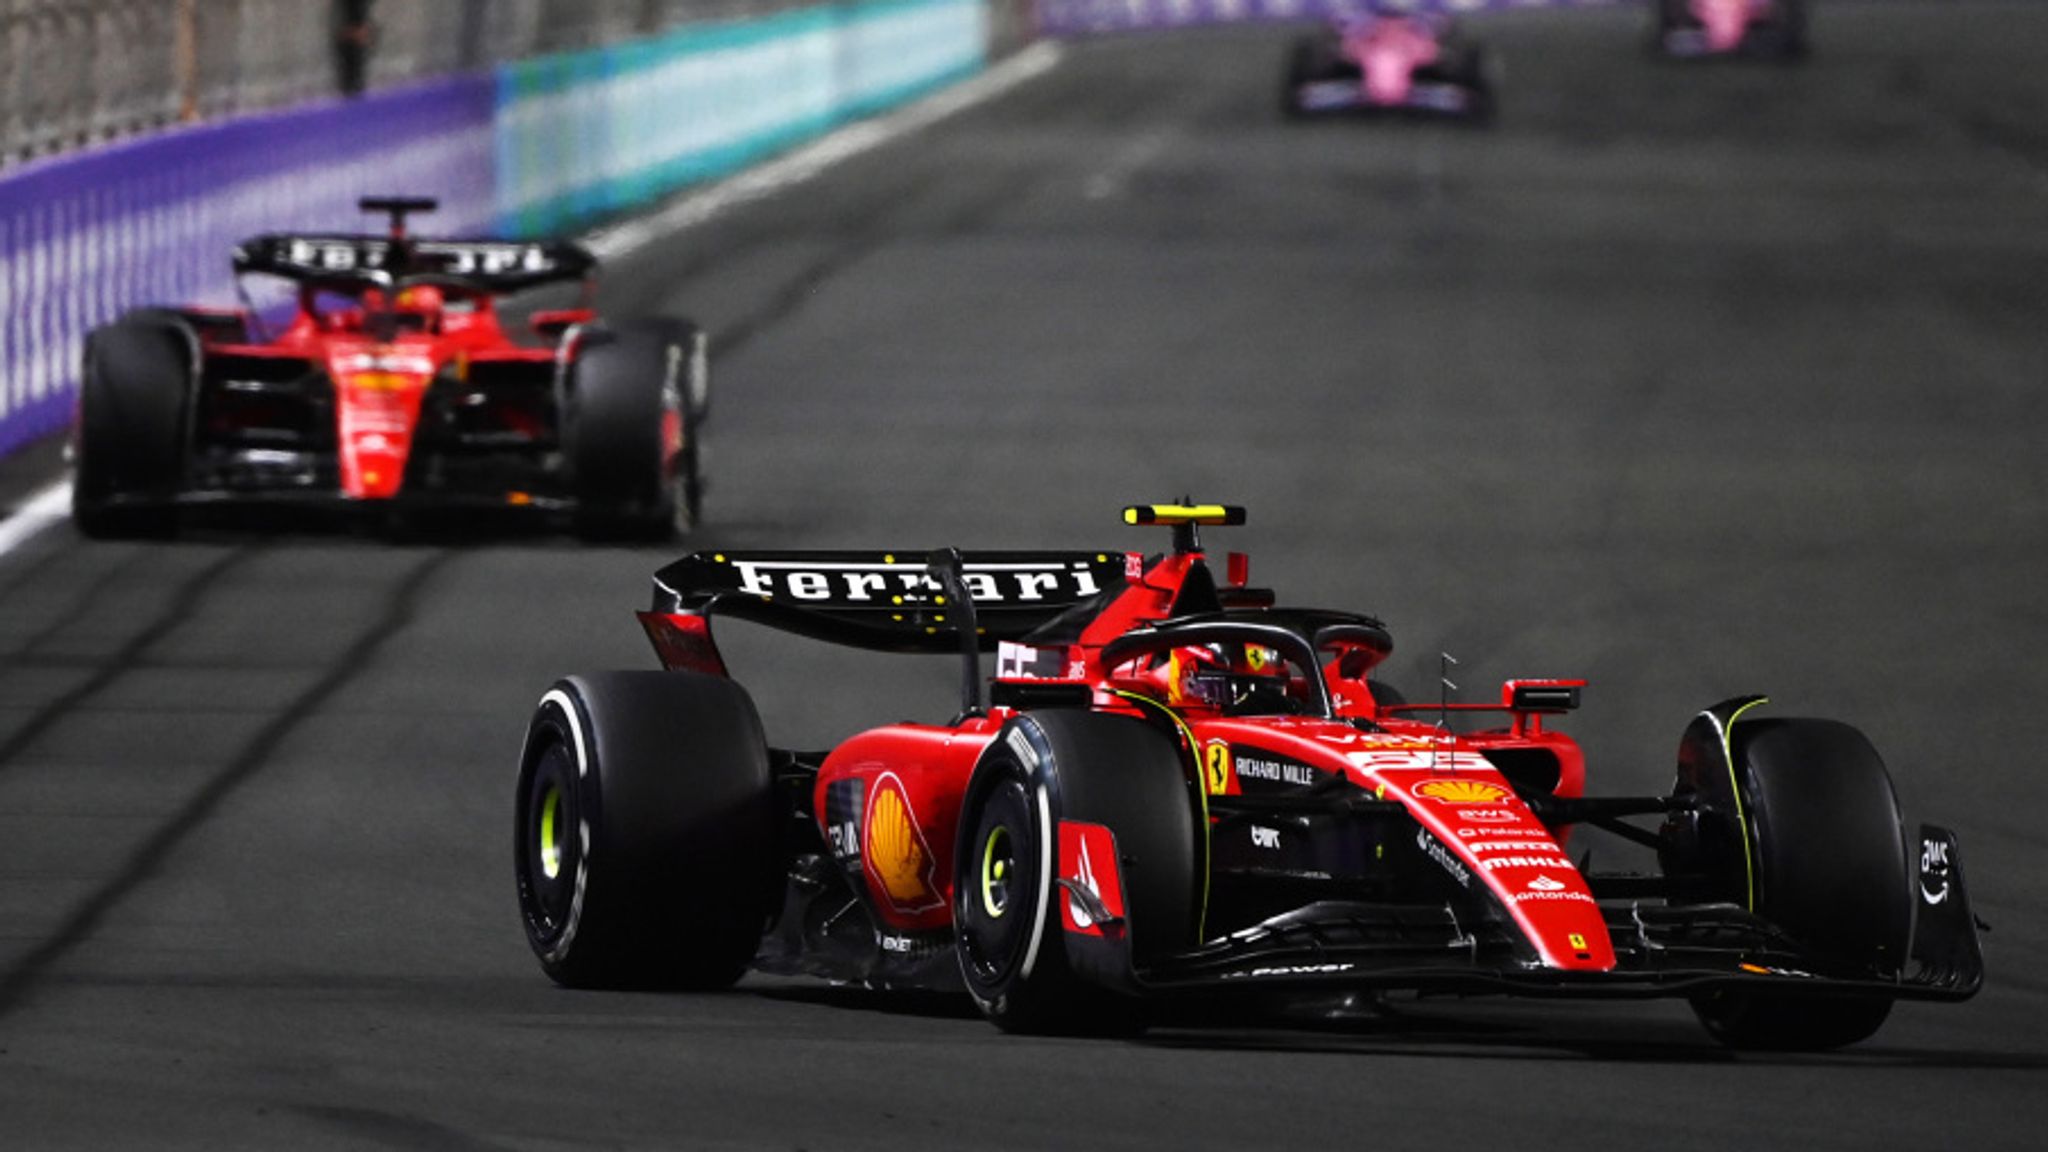 F1 News: Ferrari hopes to compensate bad strategy with a fast car in 2023  - F1 Briefings: Formula 1 News, Rumors, Standings and More